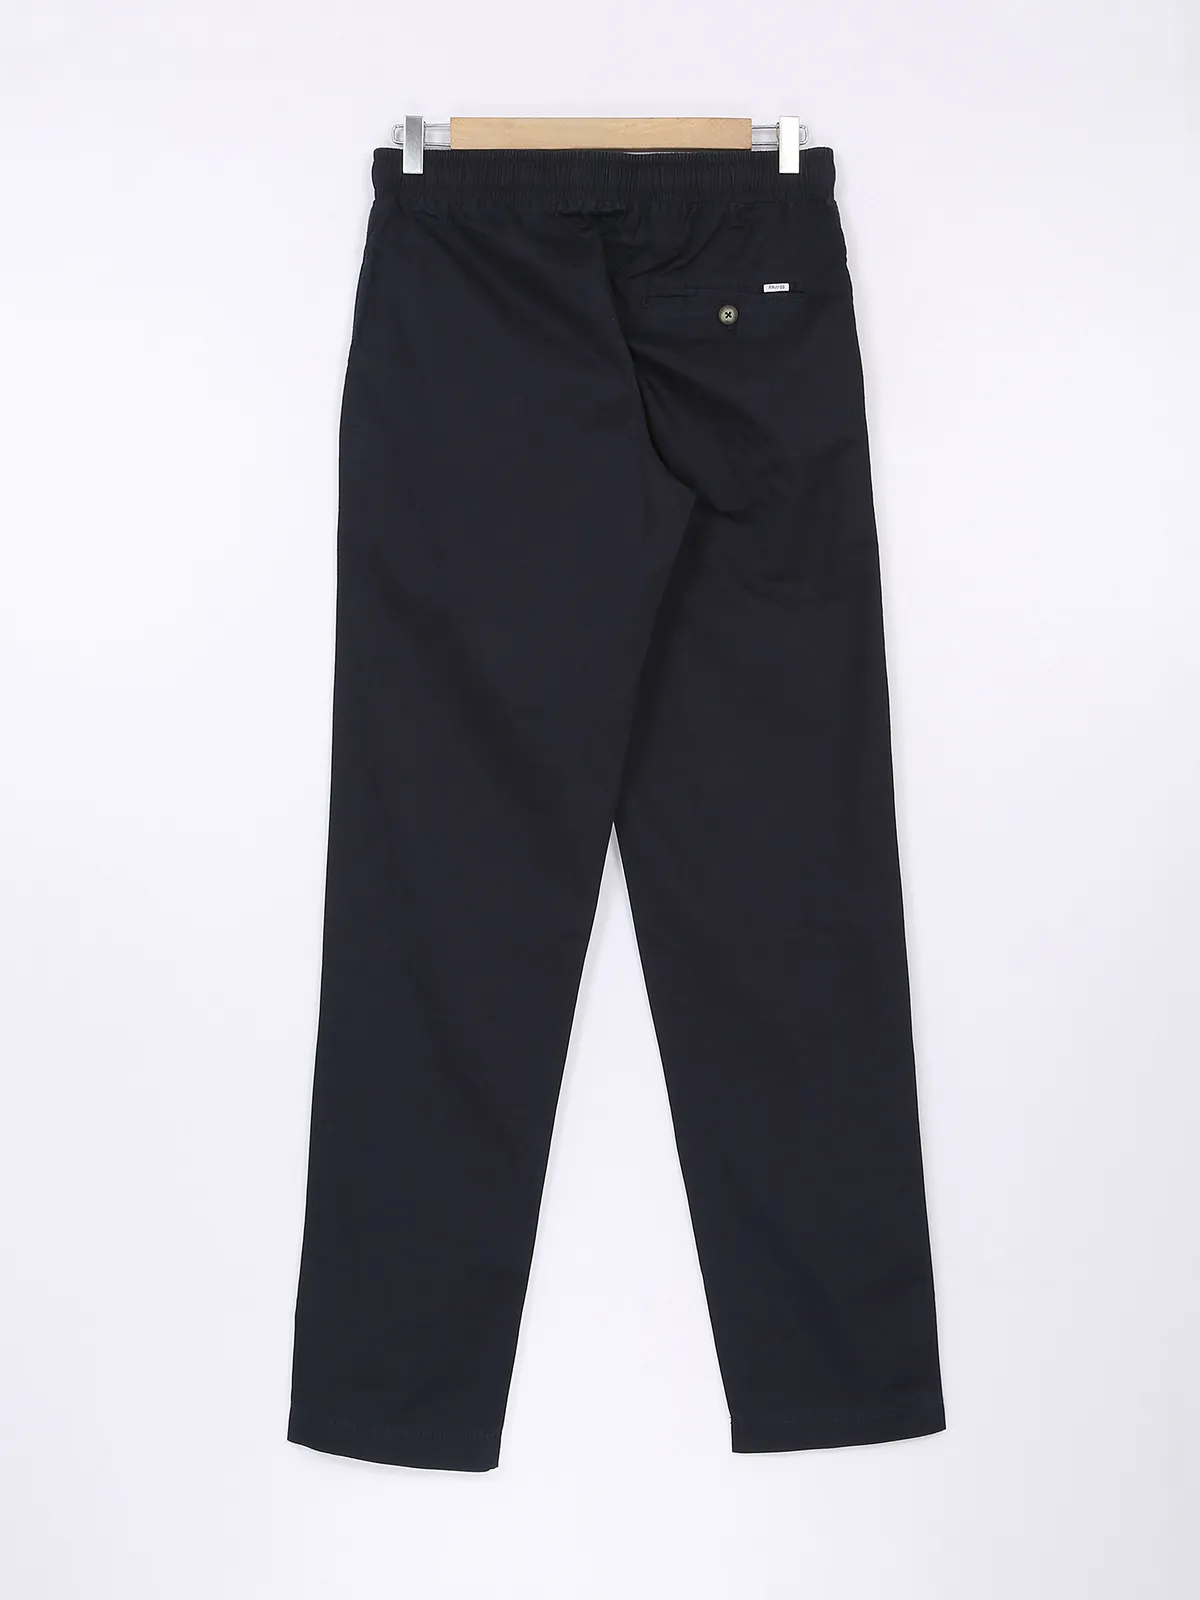 XN Replay navy solid track pant